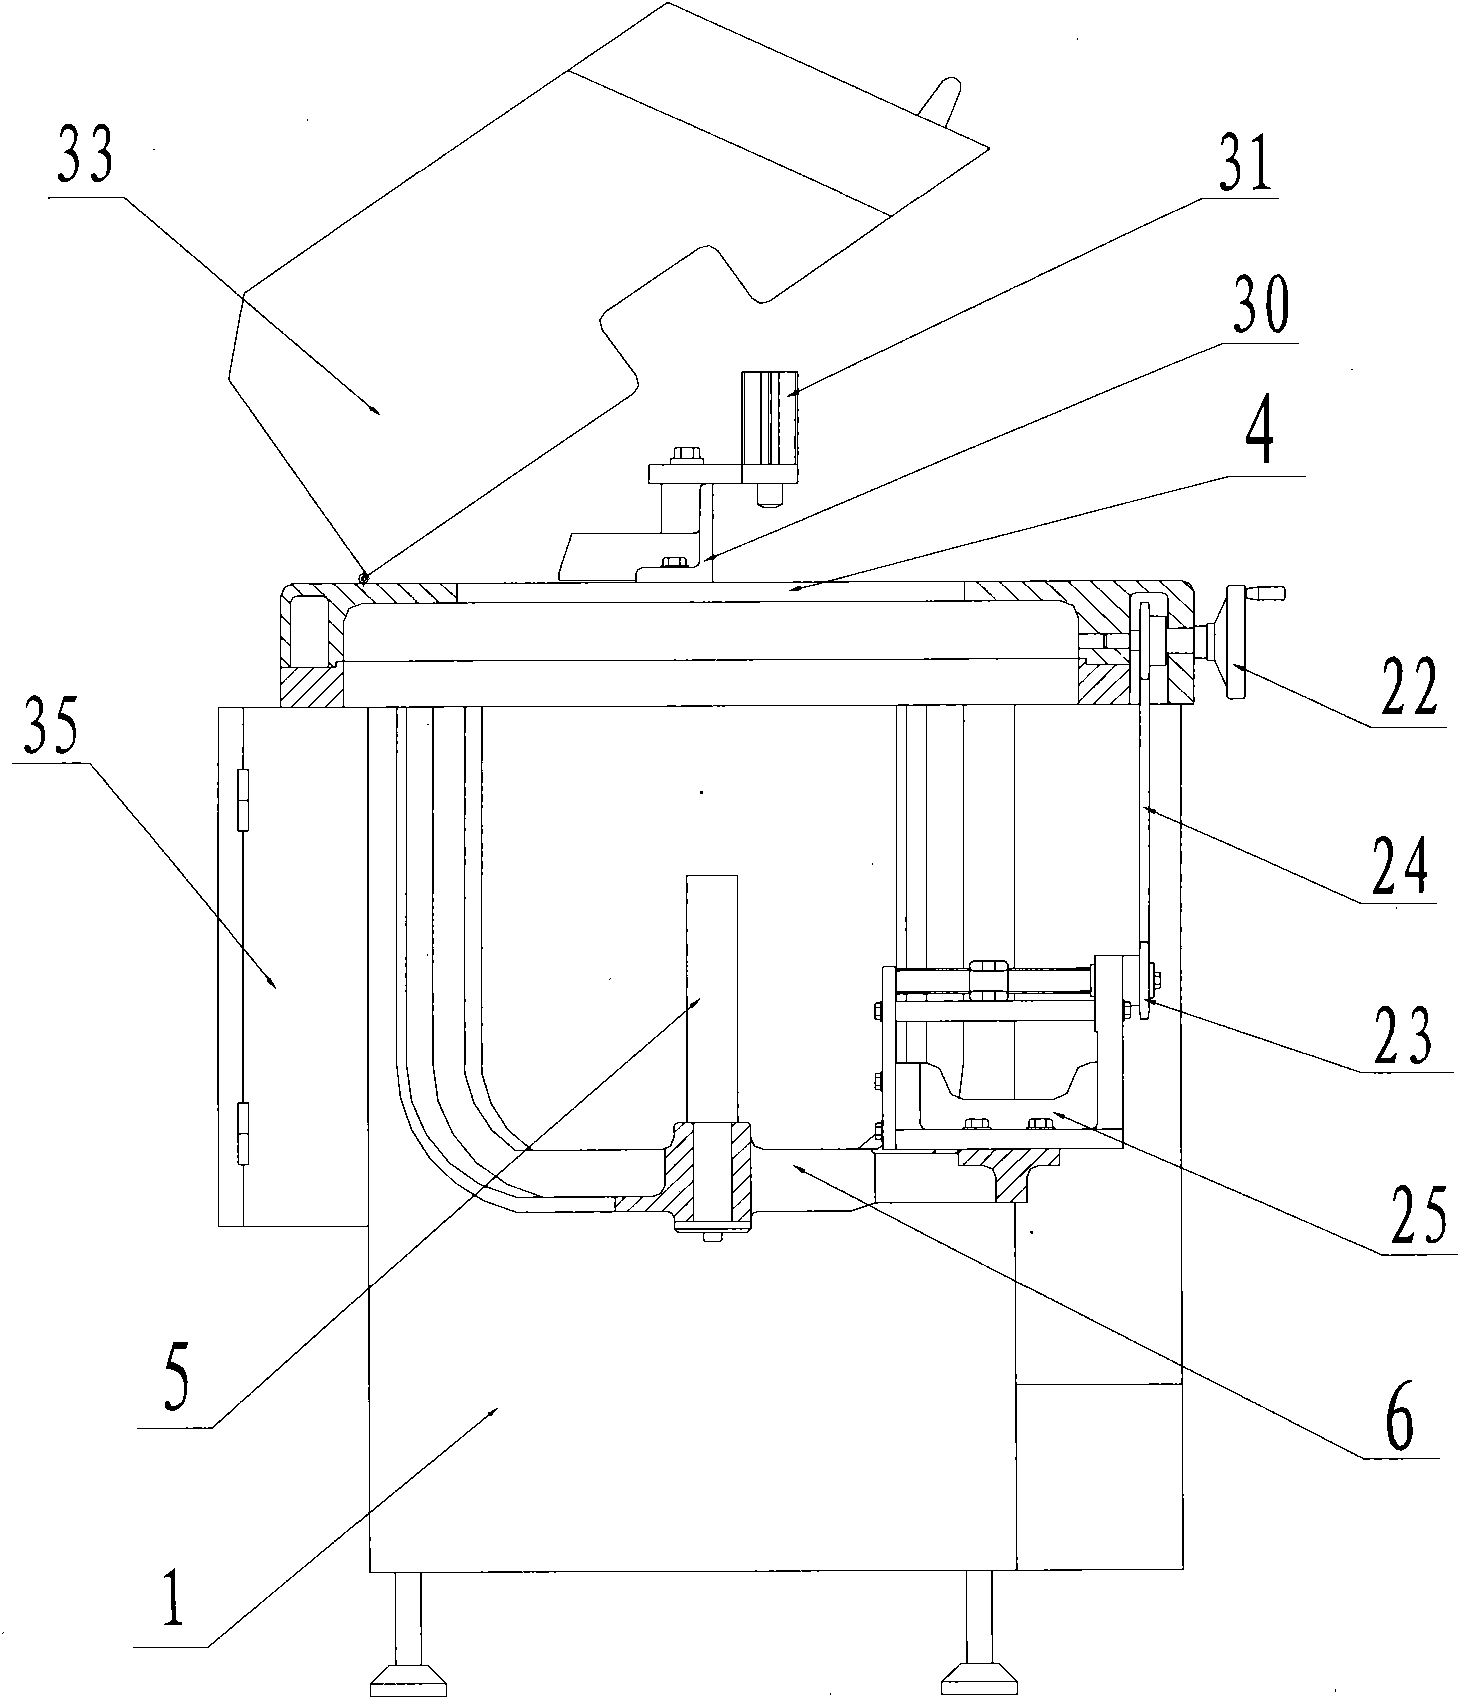 Double-saw-blade cutting machine capable of adjusting cutting angle